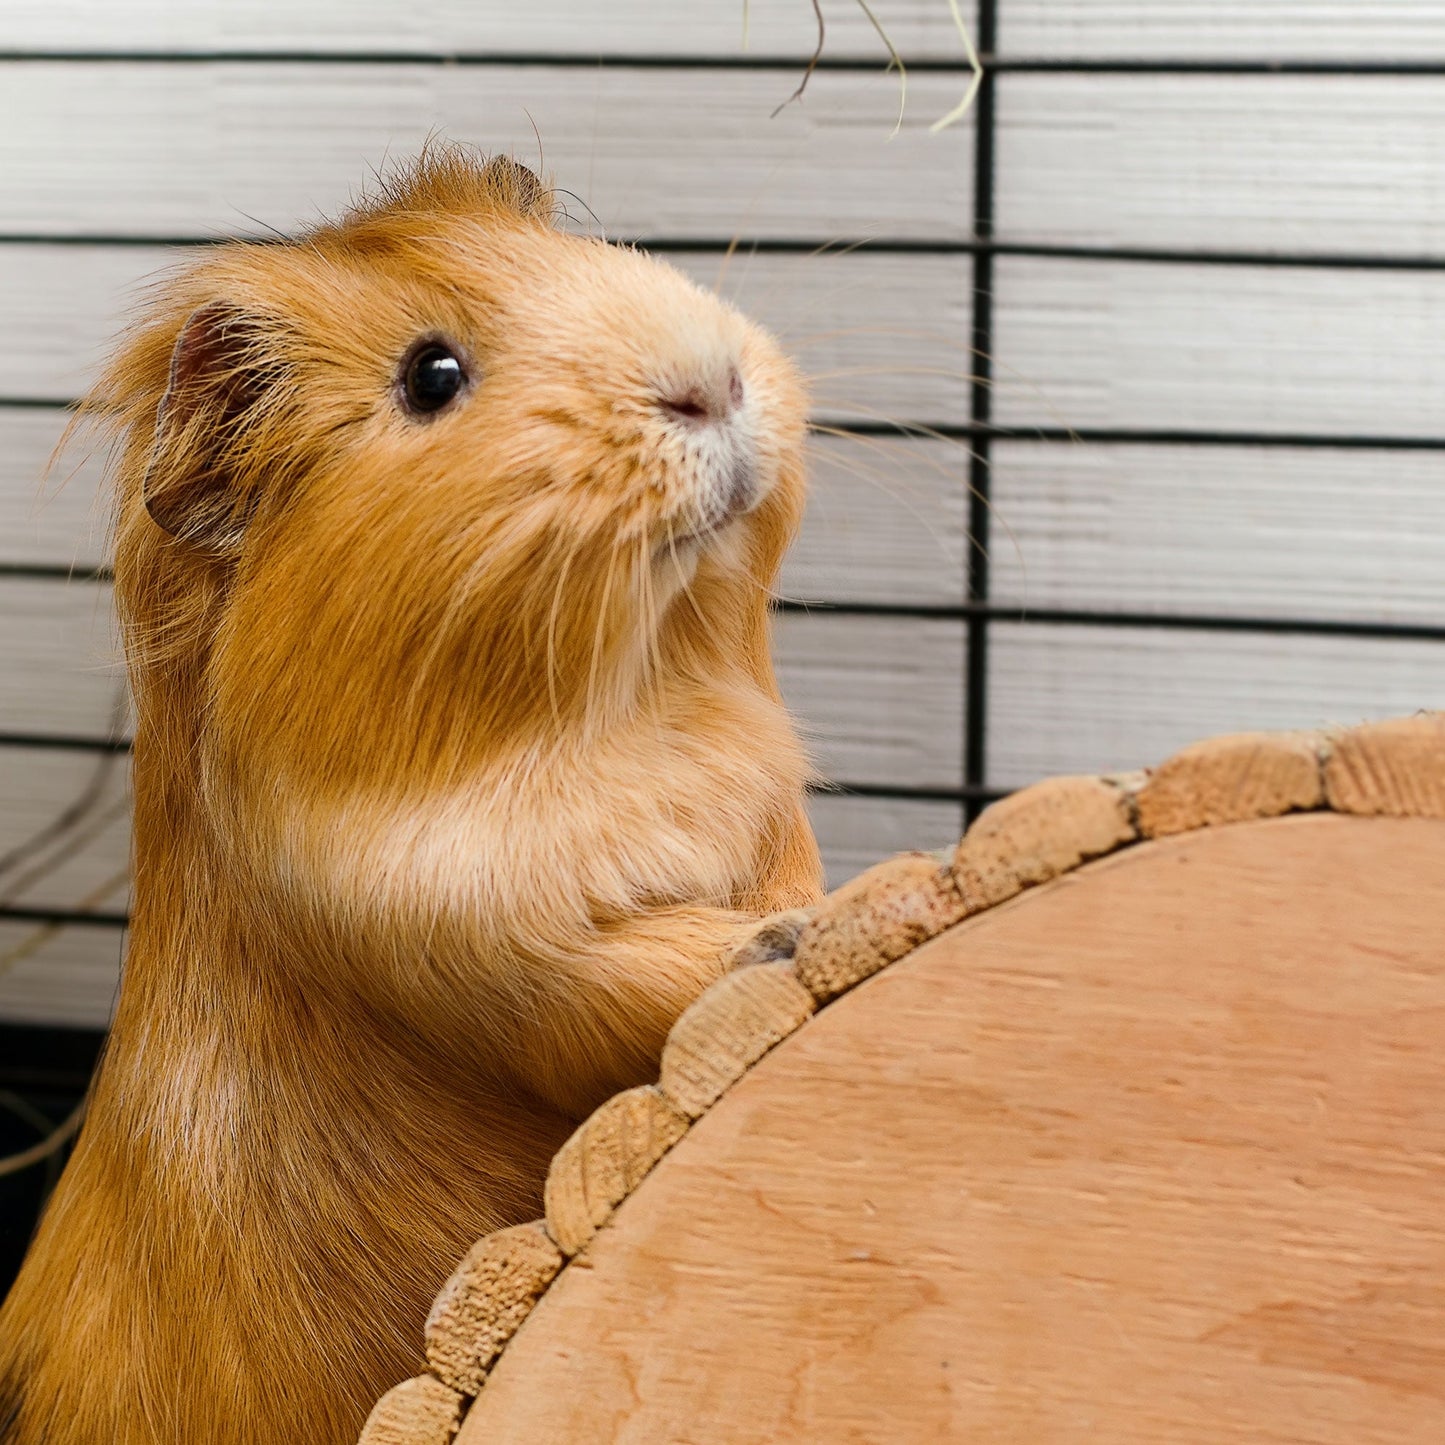 Send Supplies to Hamsters, Guinea Pigs and Other Small Animals